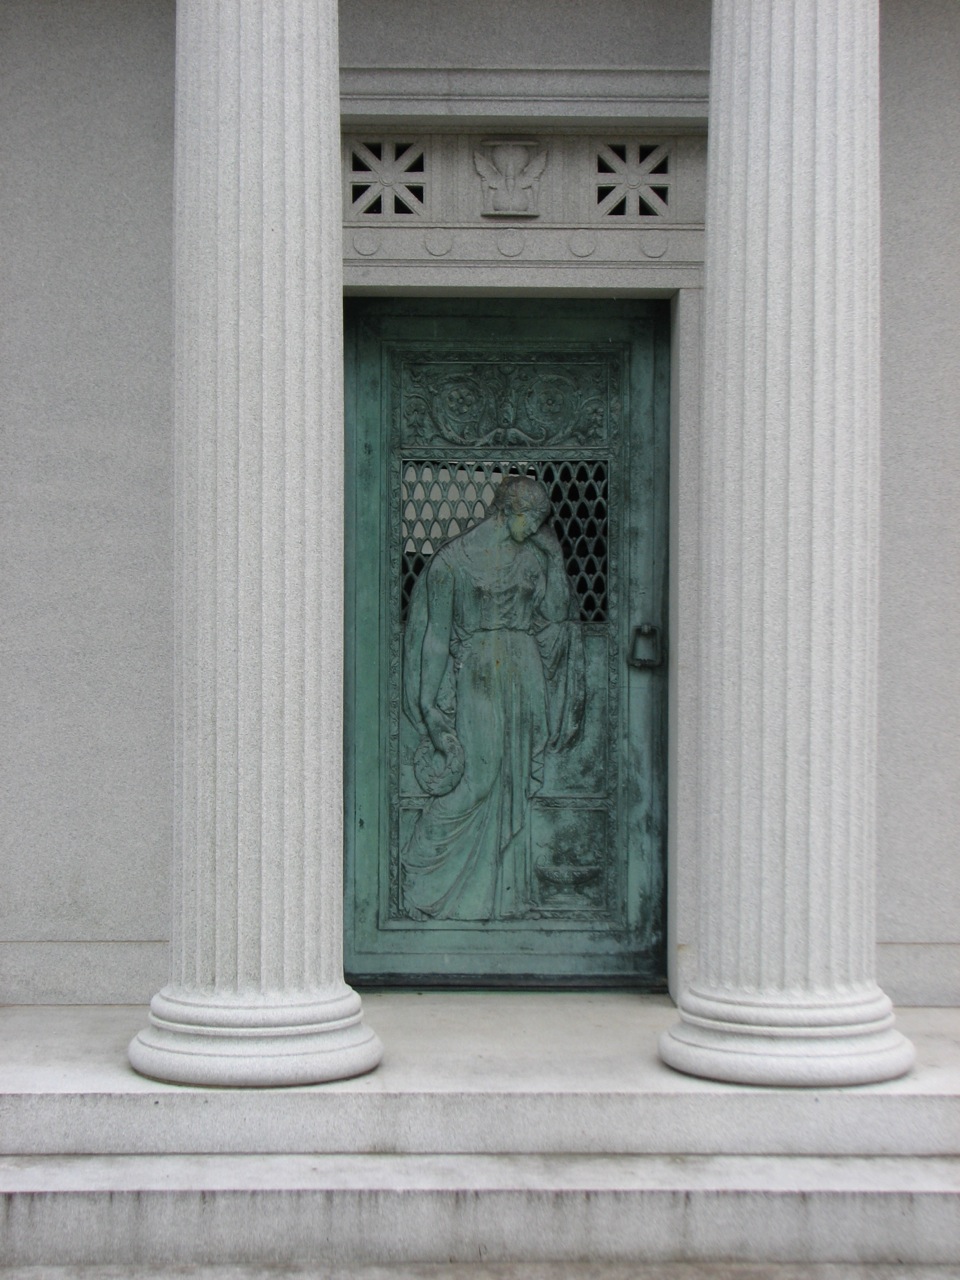 Classical columns and the figure of a woman adorn the entrance to a turn-of-the-century mausoleum.